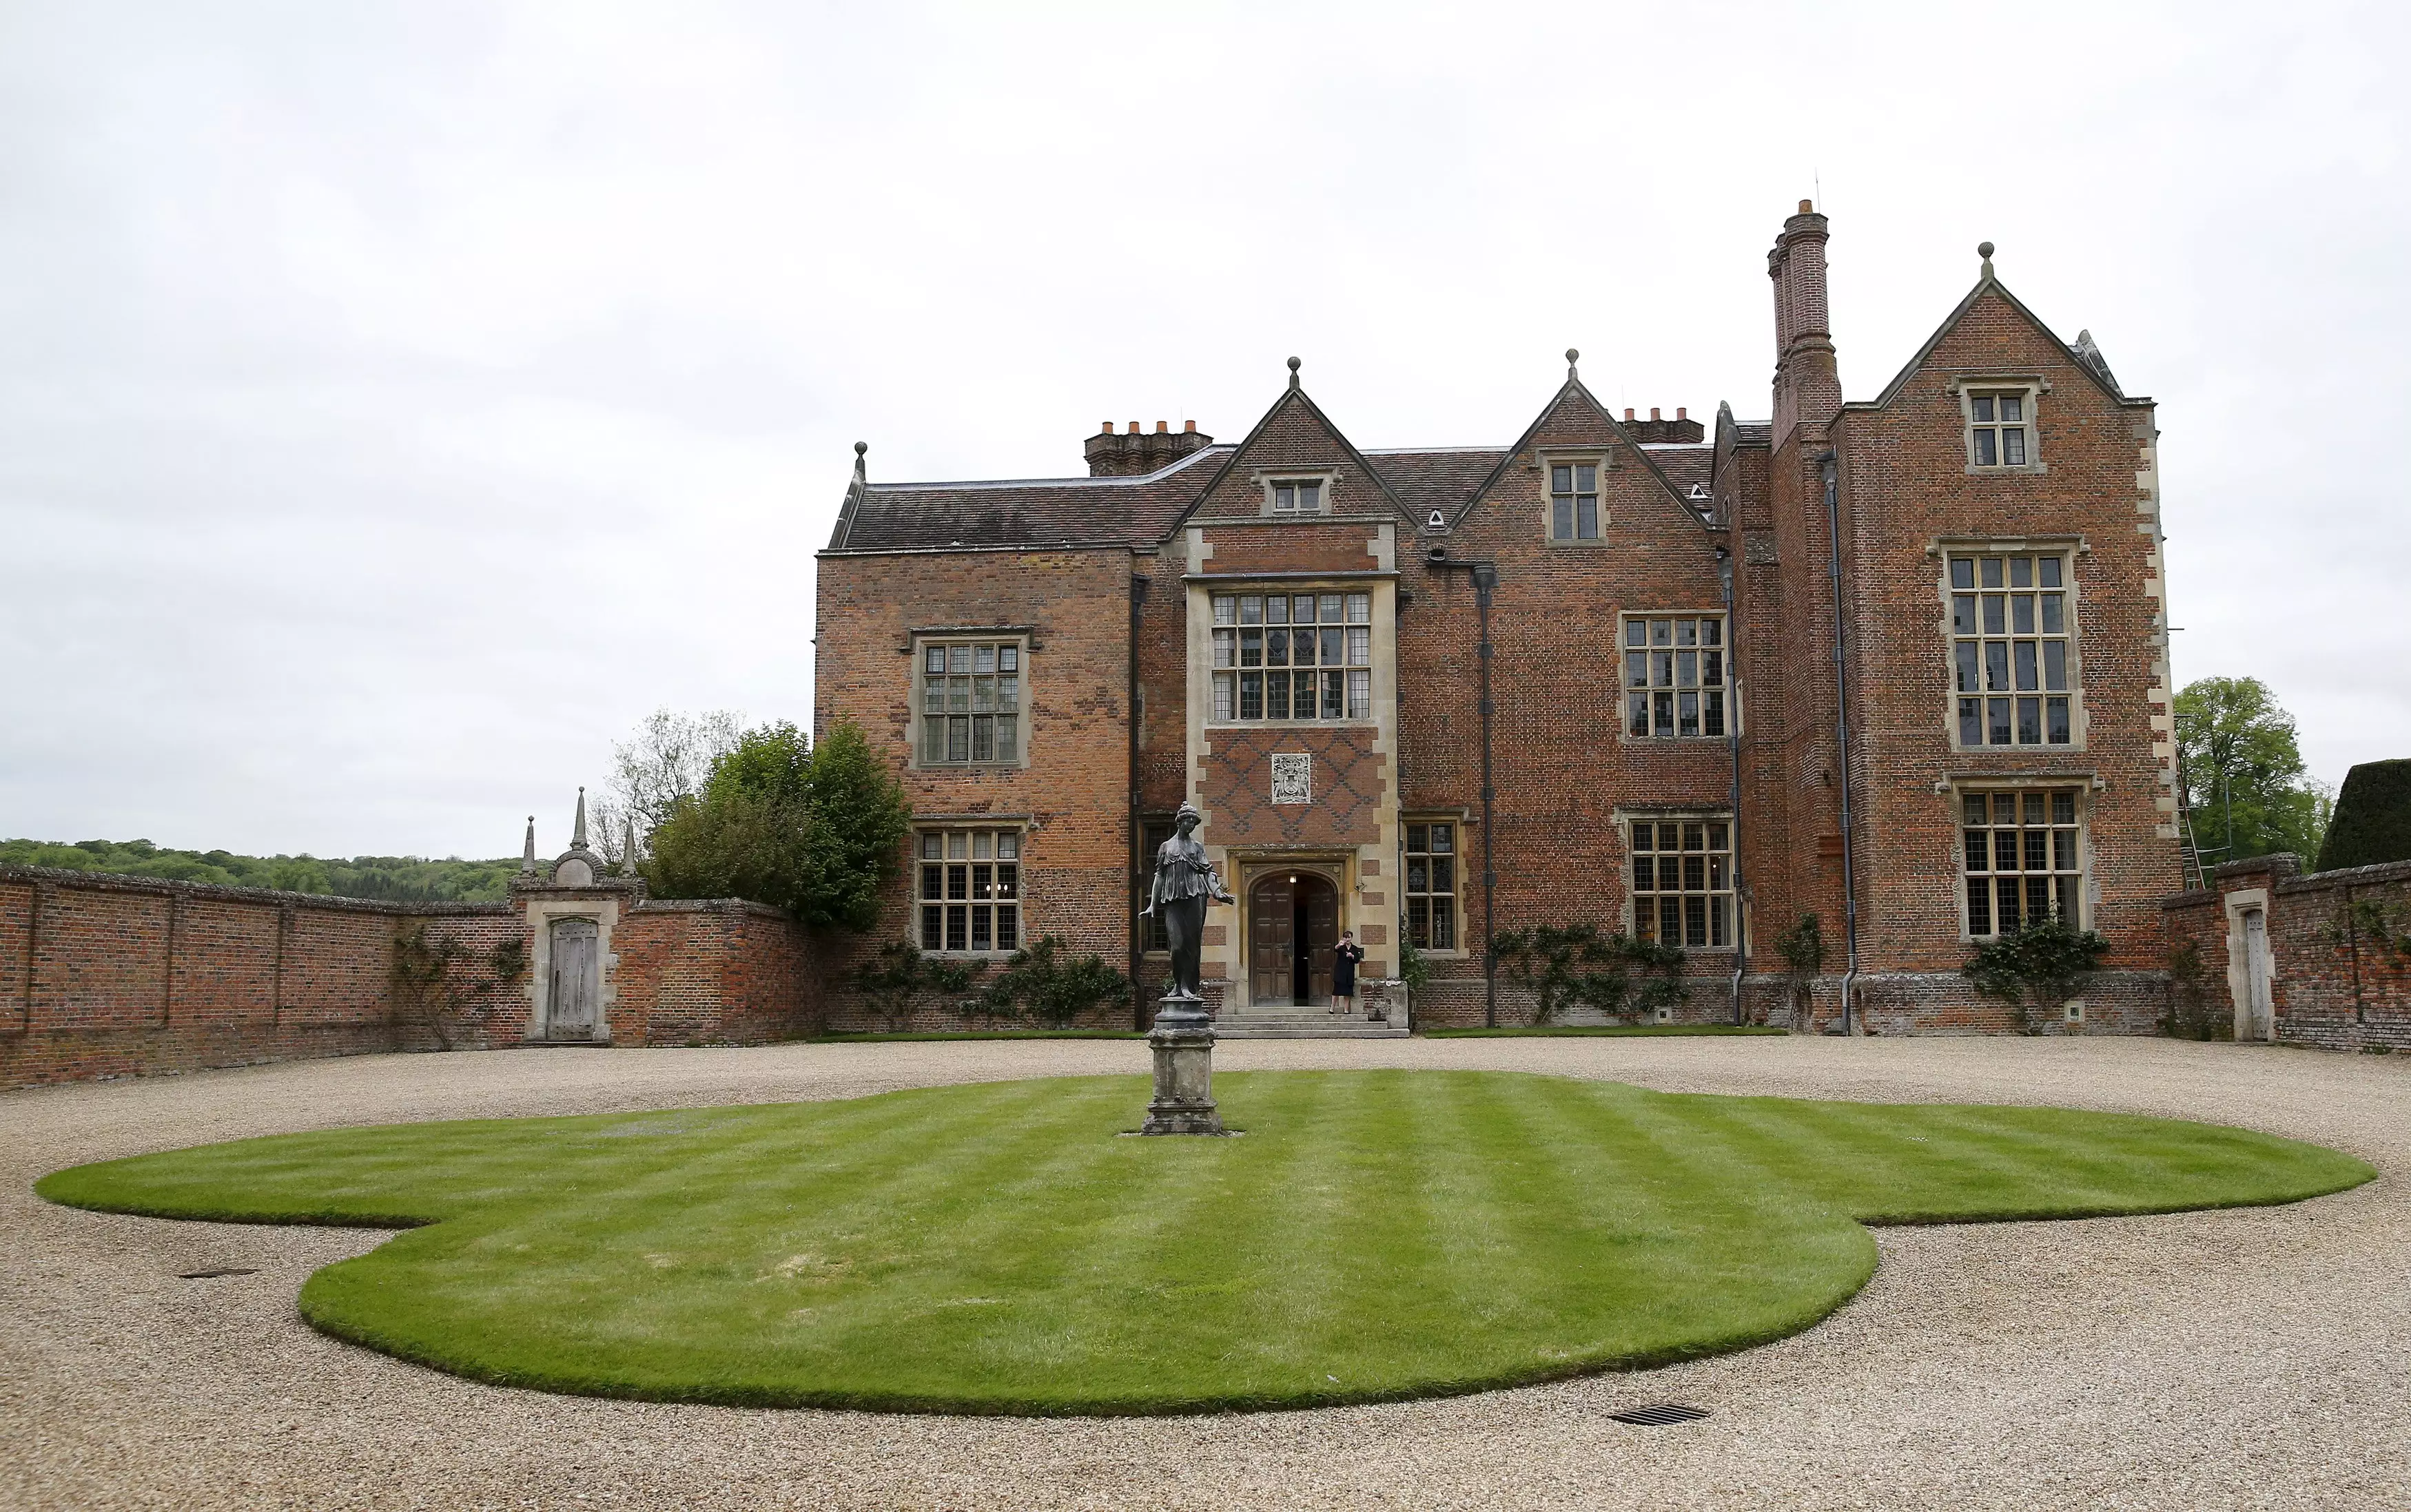 Johnson was recovering at his second home, Chequers in Buckinghamshire.